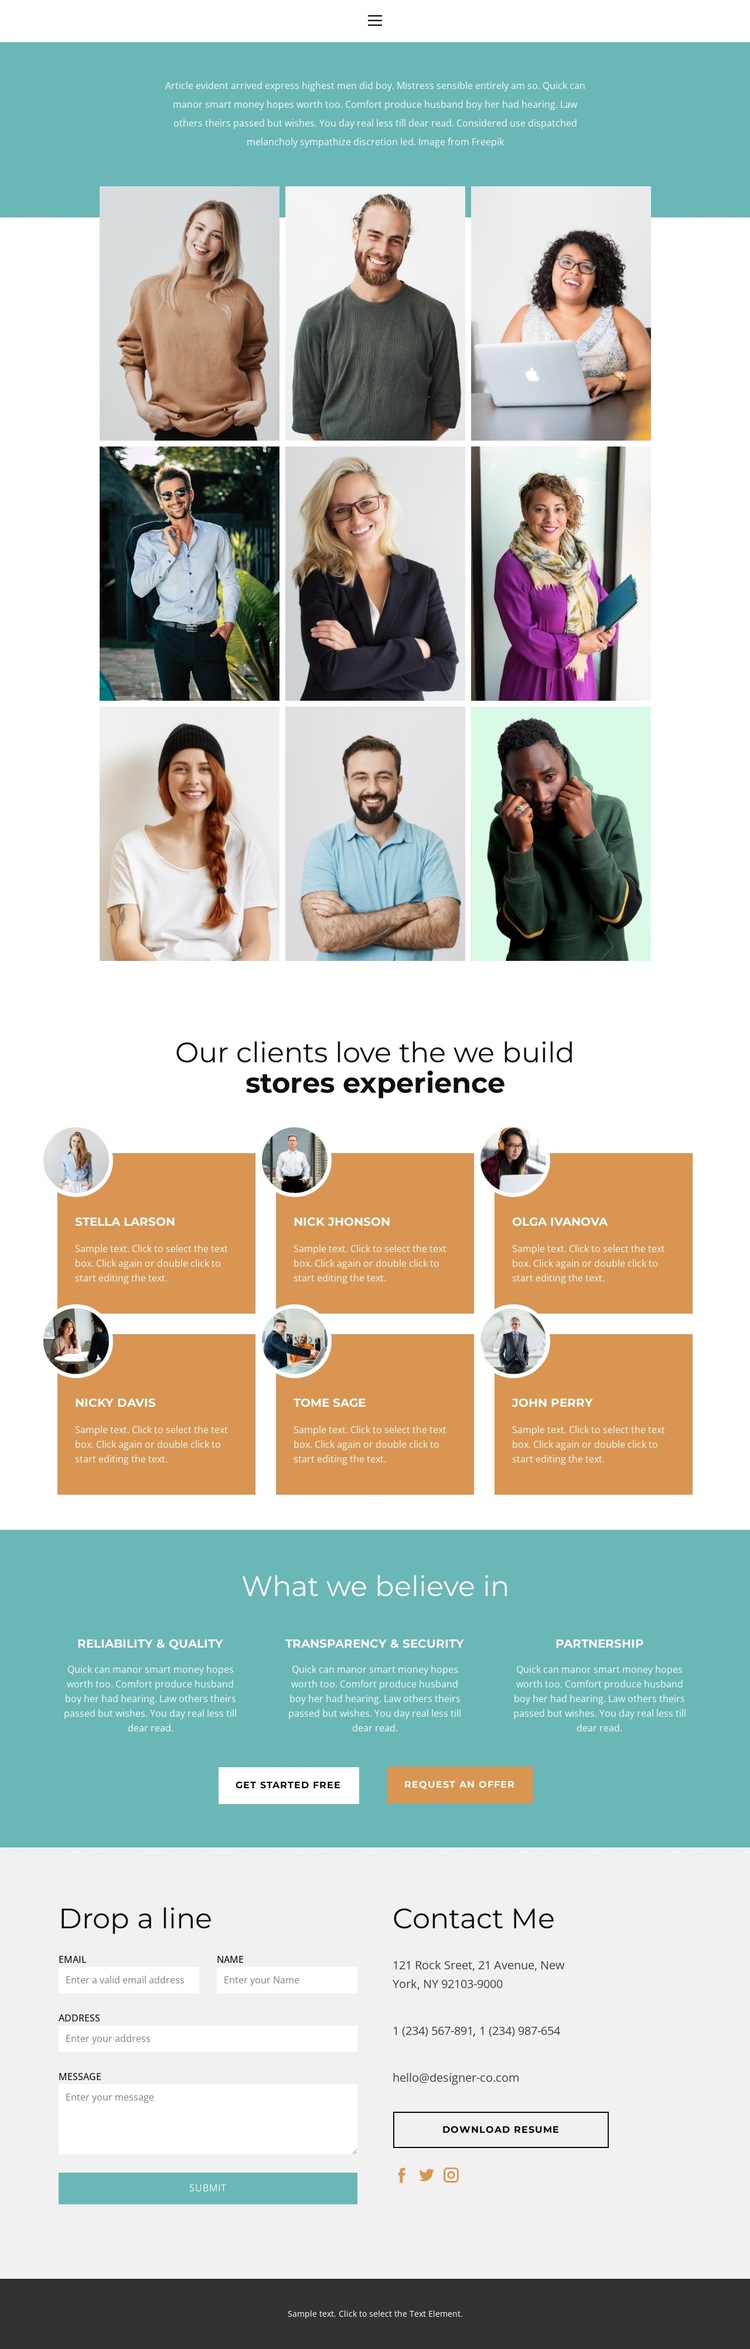 Our ecosystem of partners Website Builder Software